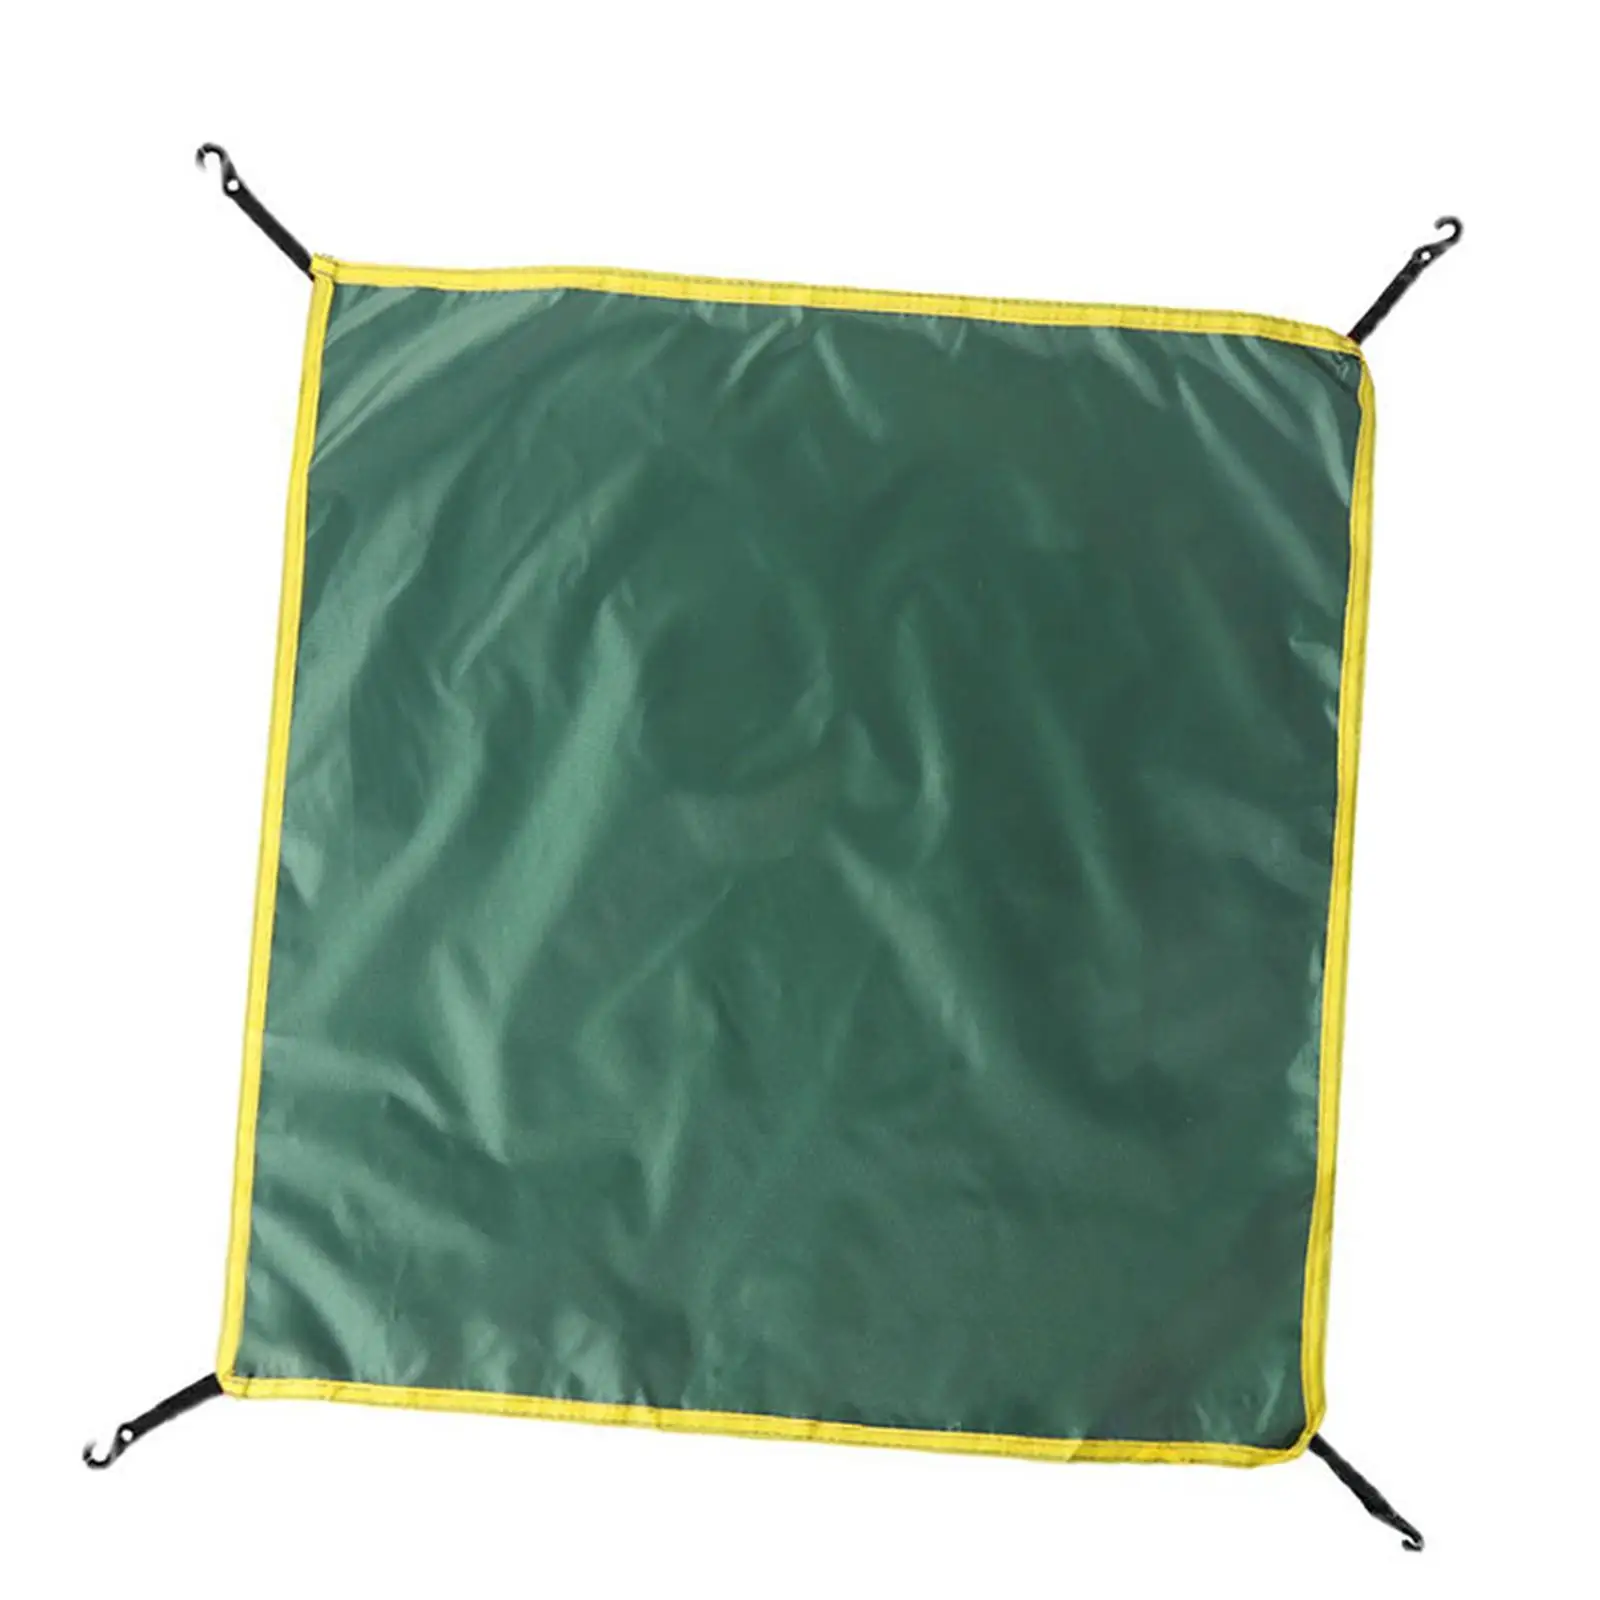 Attachment : Fits 3-4 Person Instant Tents (3.6ft X 3.6ft), for Tent Only,